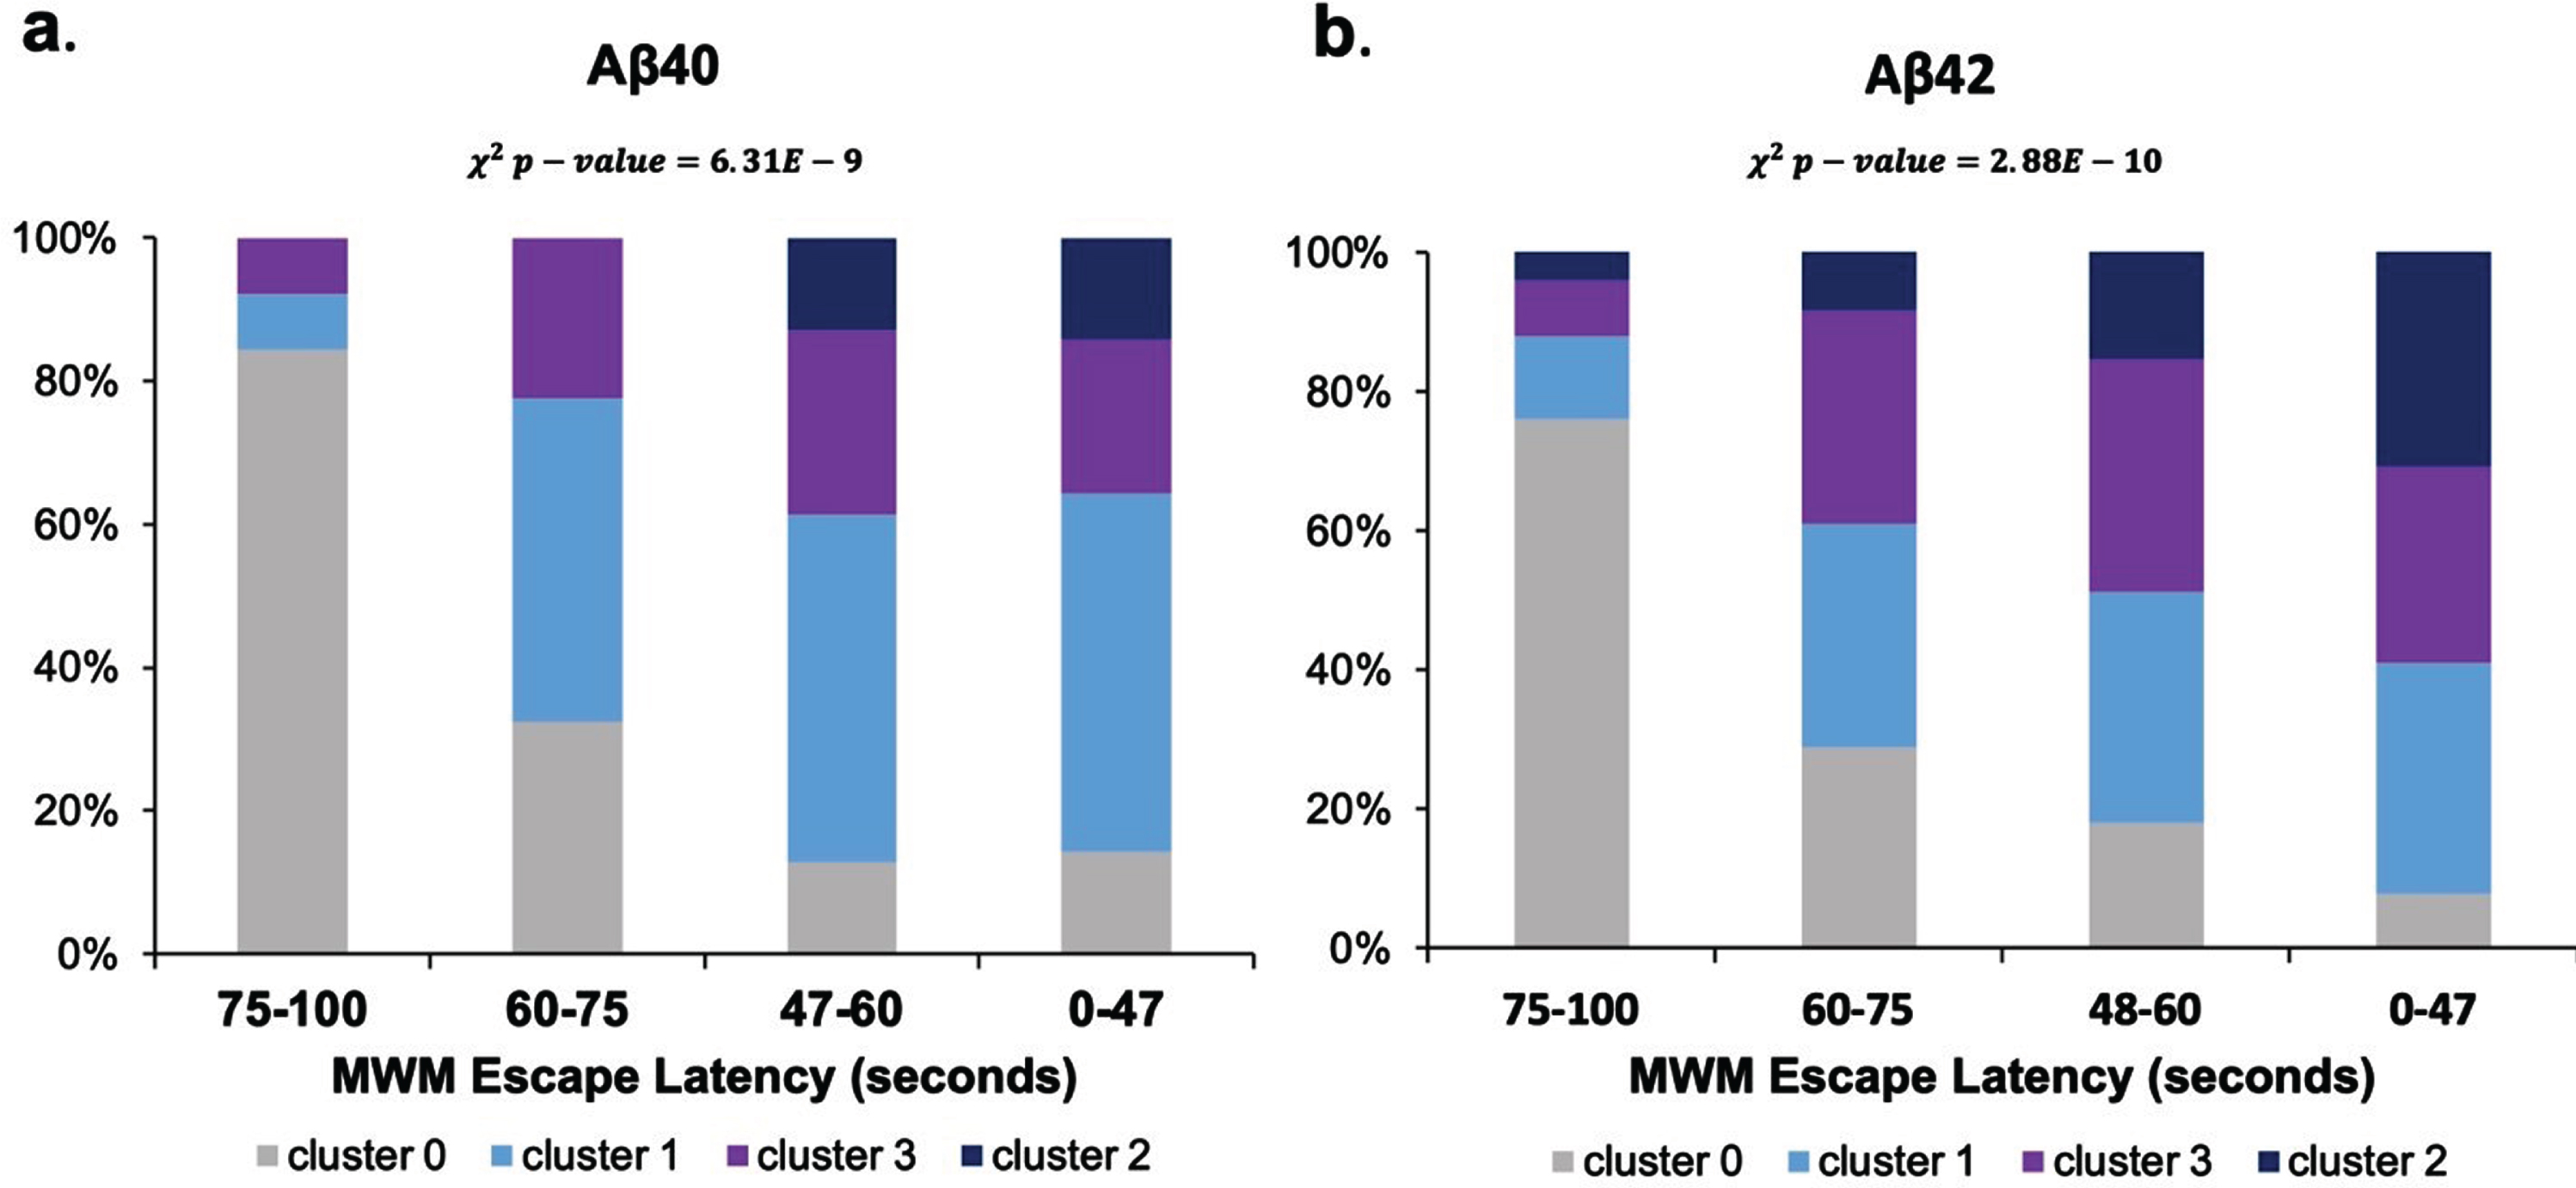 Assessment of Aβ reduction thresholds and association with MWM escape latency. Normalized MWM escape latencies are shown in seconds. Cluster 0 corresponded to untreated transgenic AD mice. Cluster 1 (light blue) corresponded to treated transgenic AD mice that had a mean 25% overall Aβ reduction compared to control. Cluster 3 (purple) corresponded to treated transgenic AD mice that had a mean 50% Aβ reduction compared to untreated transgenic control. Cluster 2 (navy) corresponded to wild type mice, which had on average 19% of the overall Aβ levels compared to control.